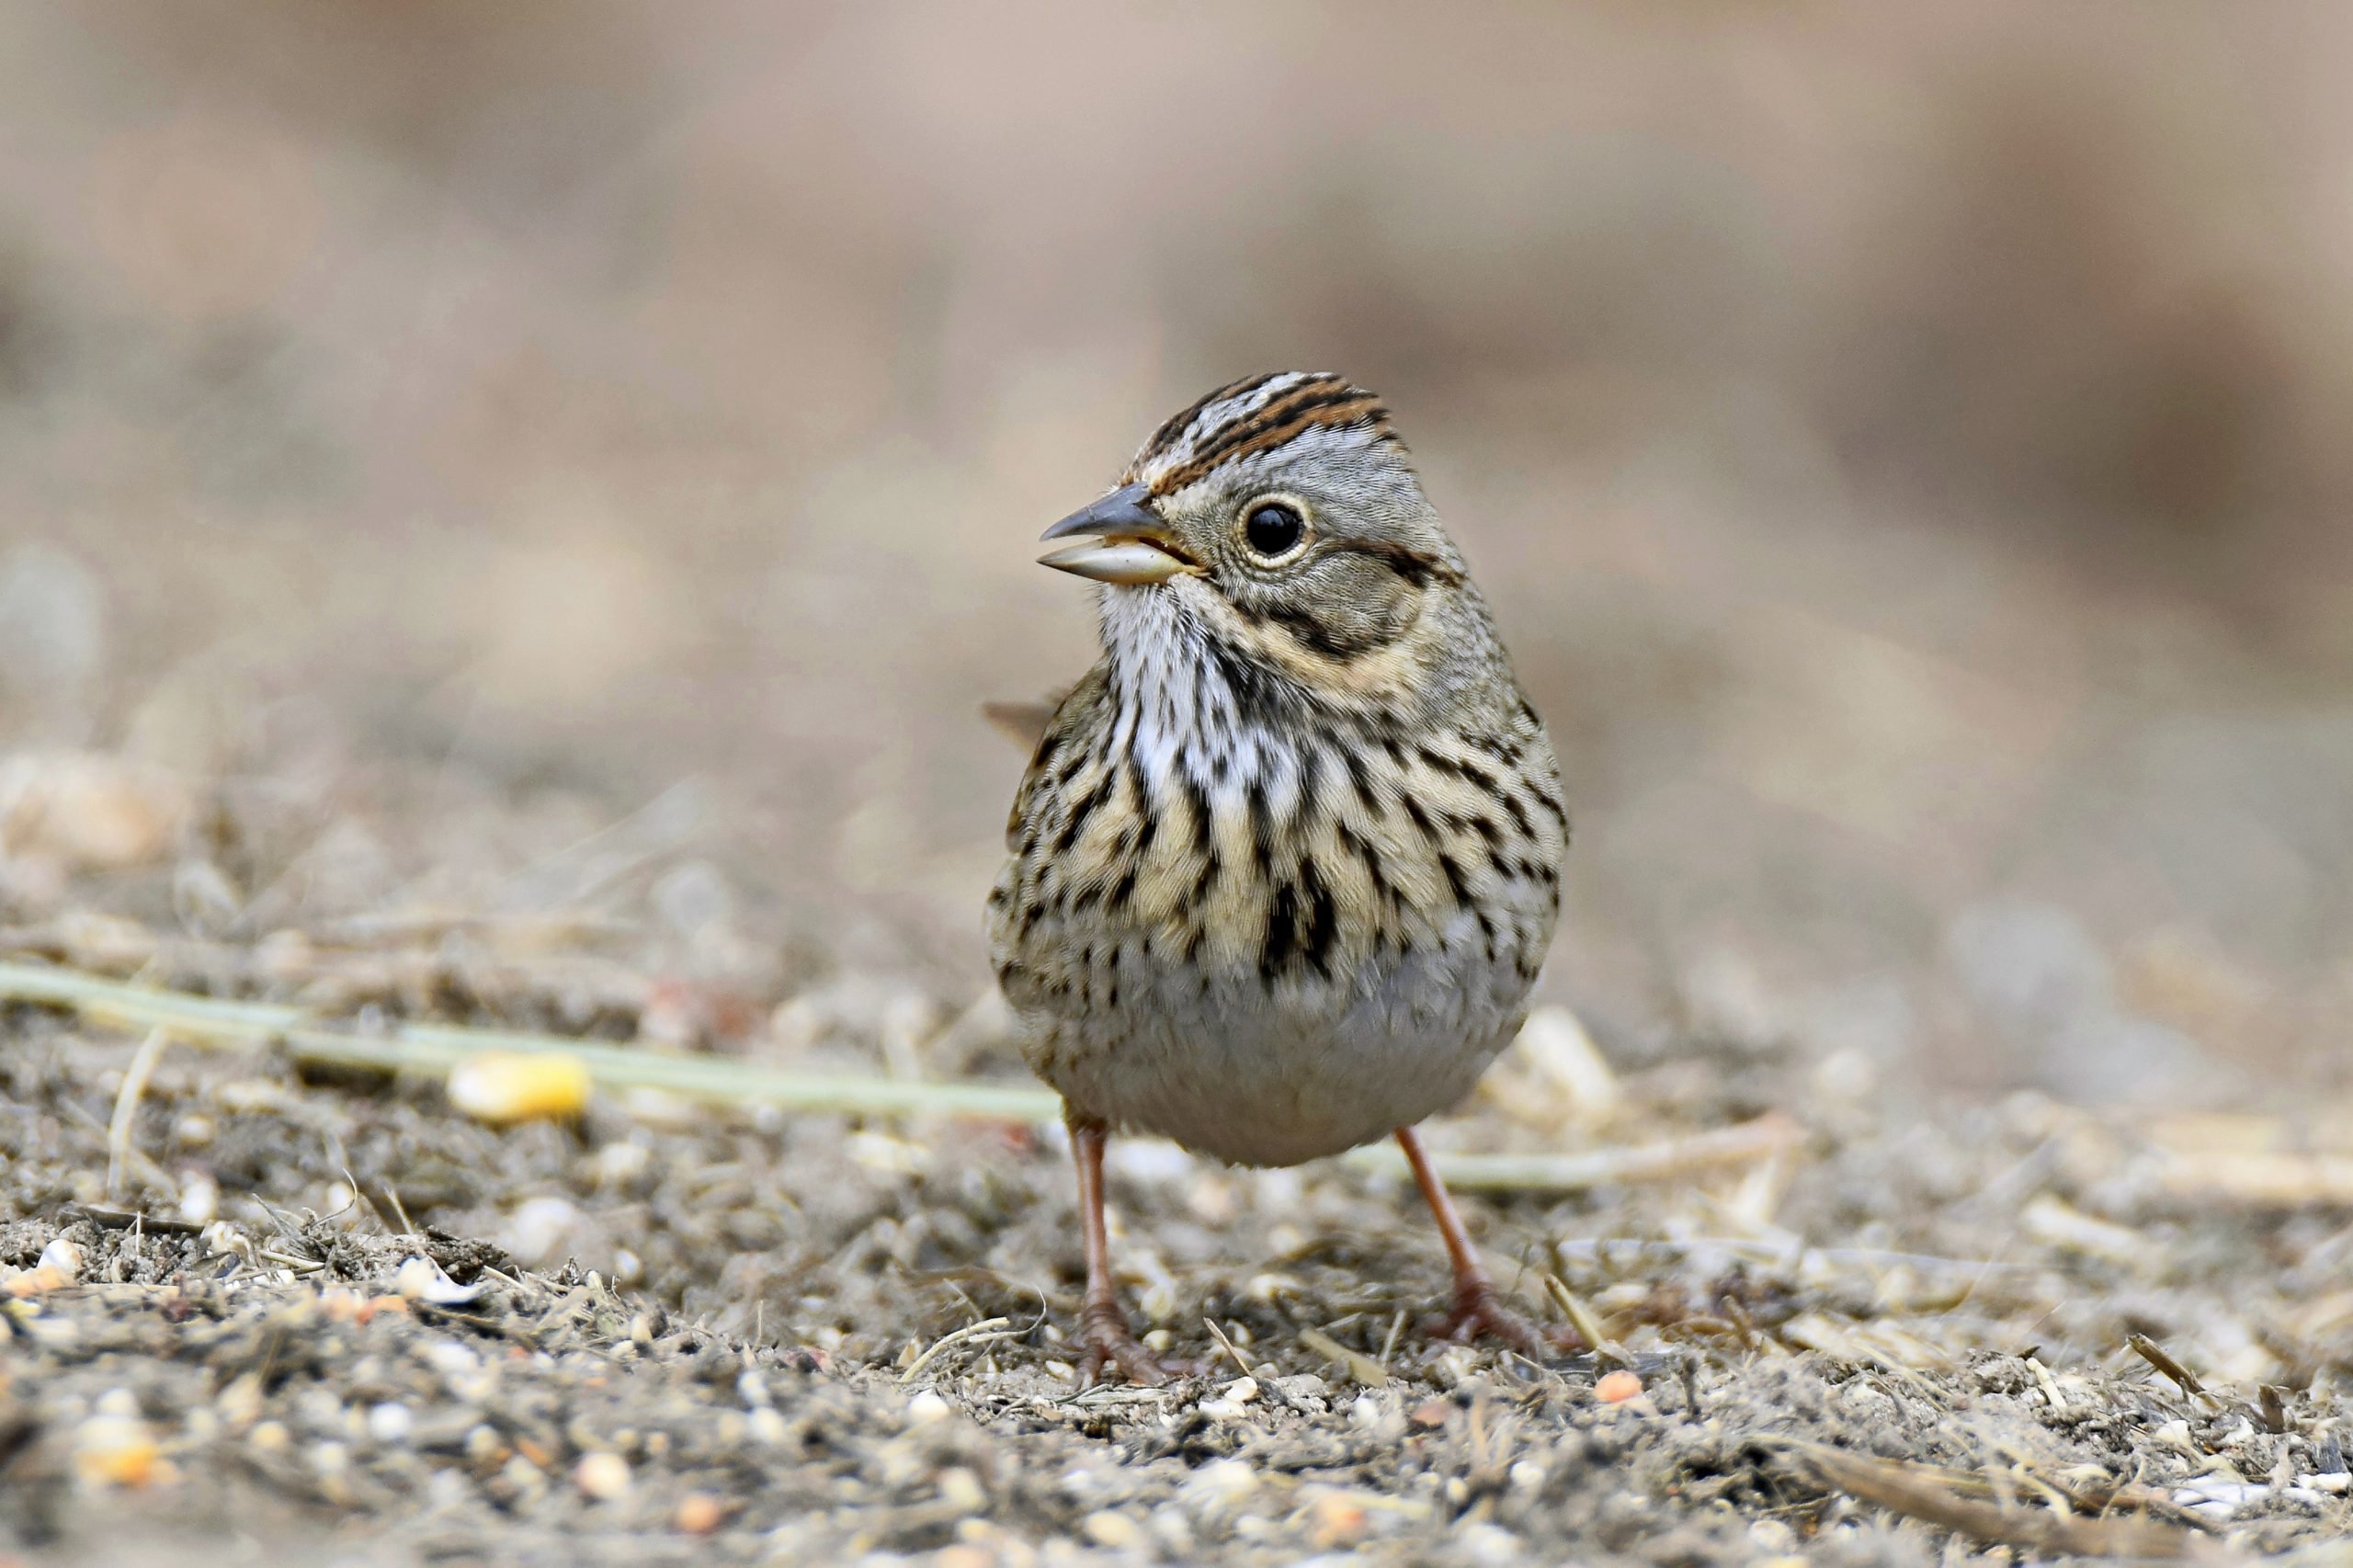 How to Identify a Lincoln's Sparrow